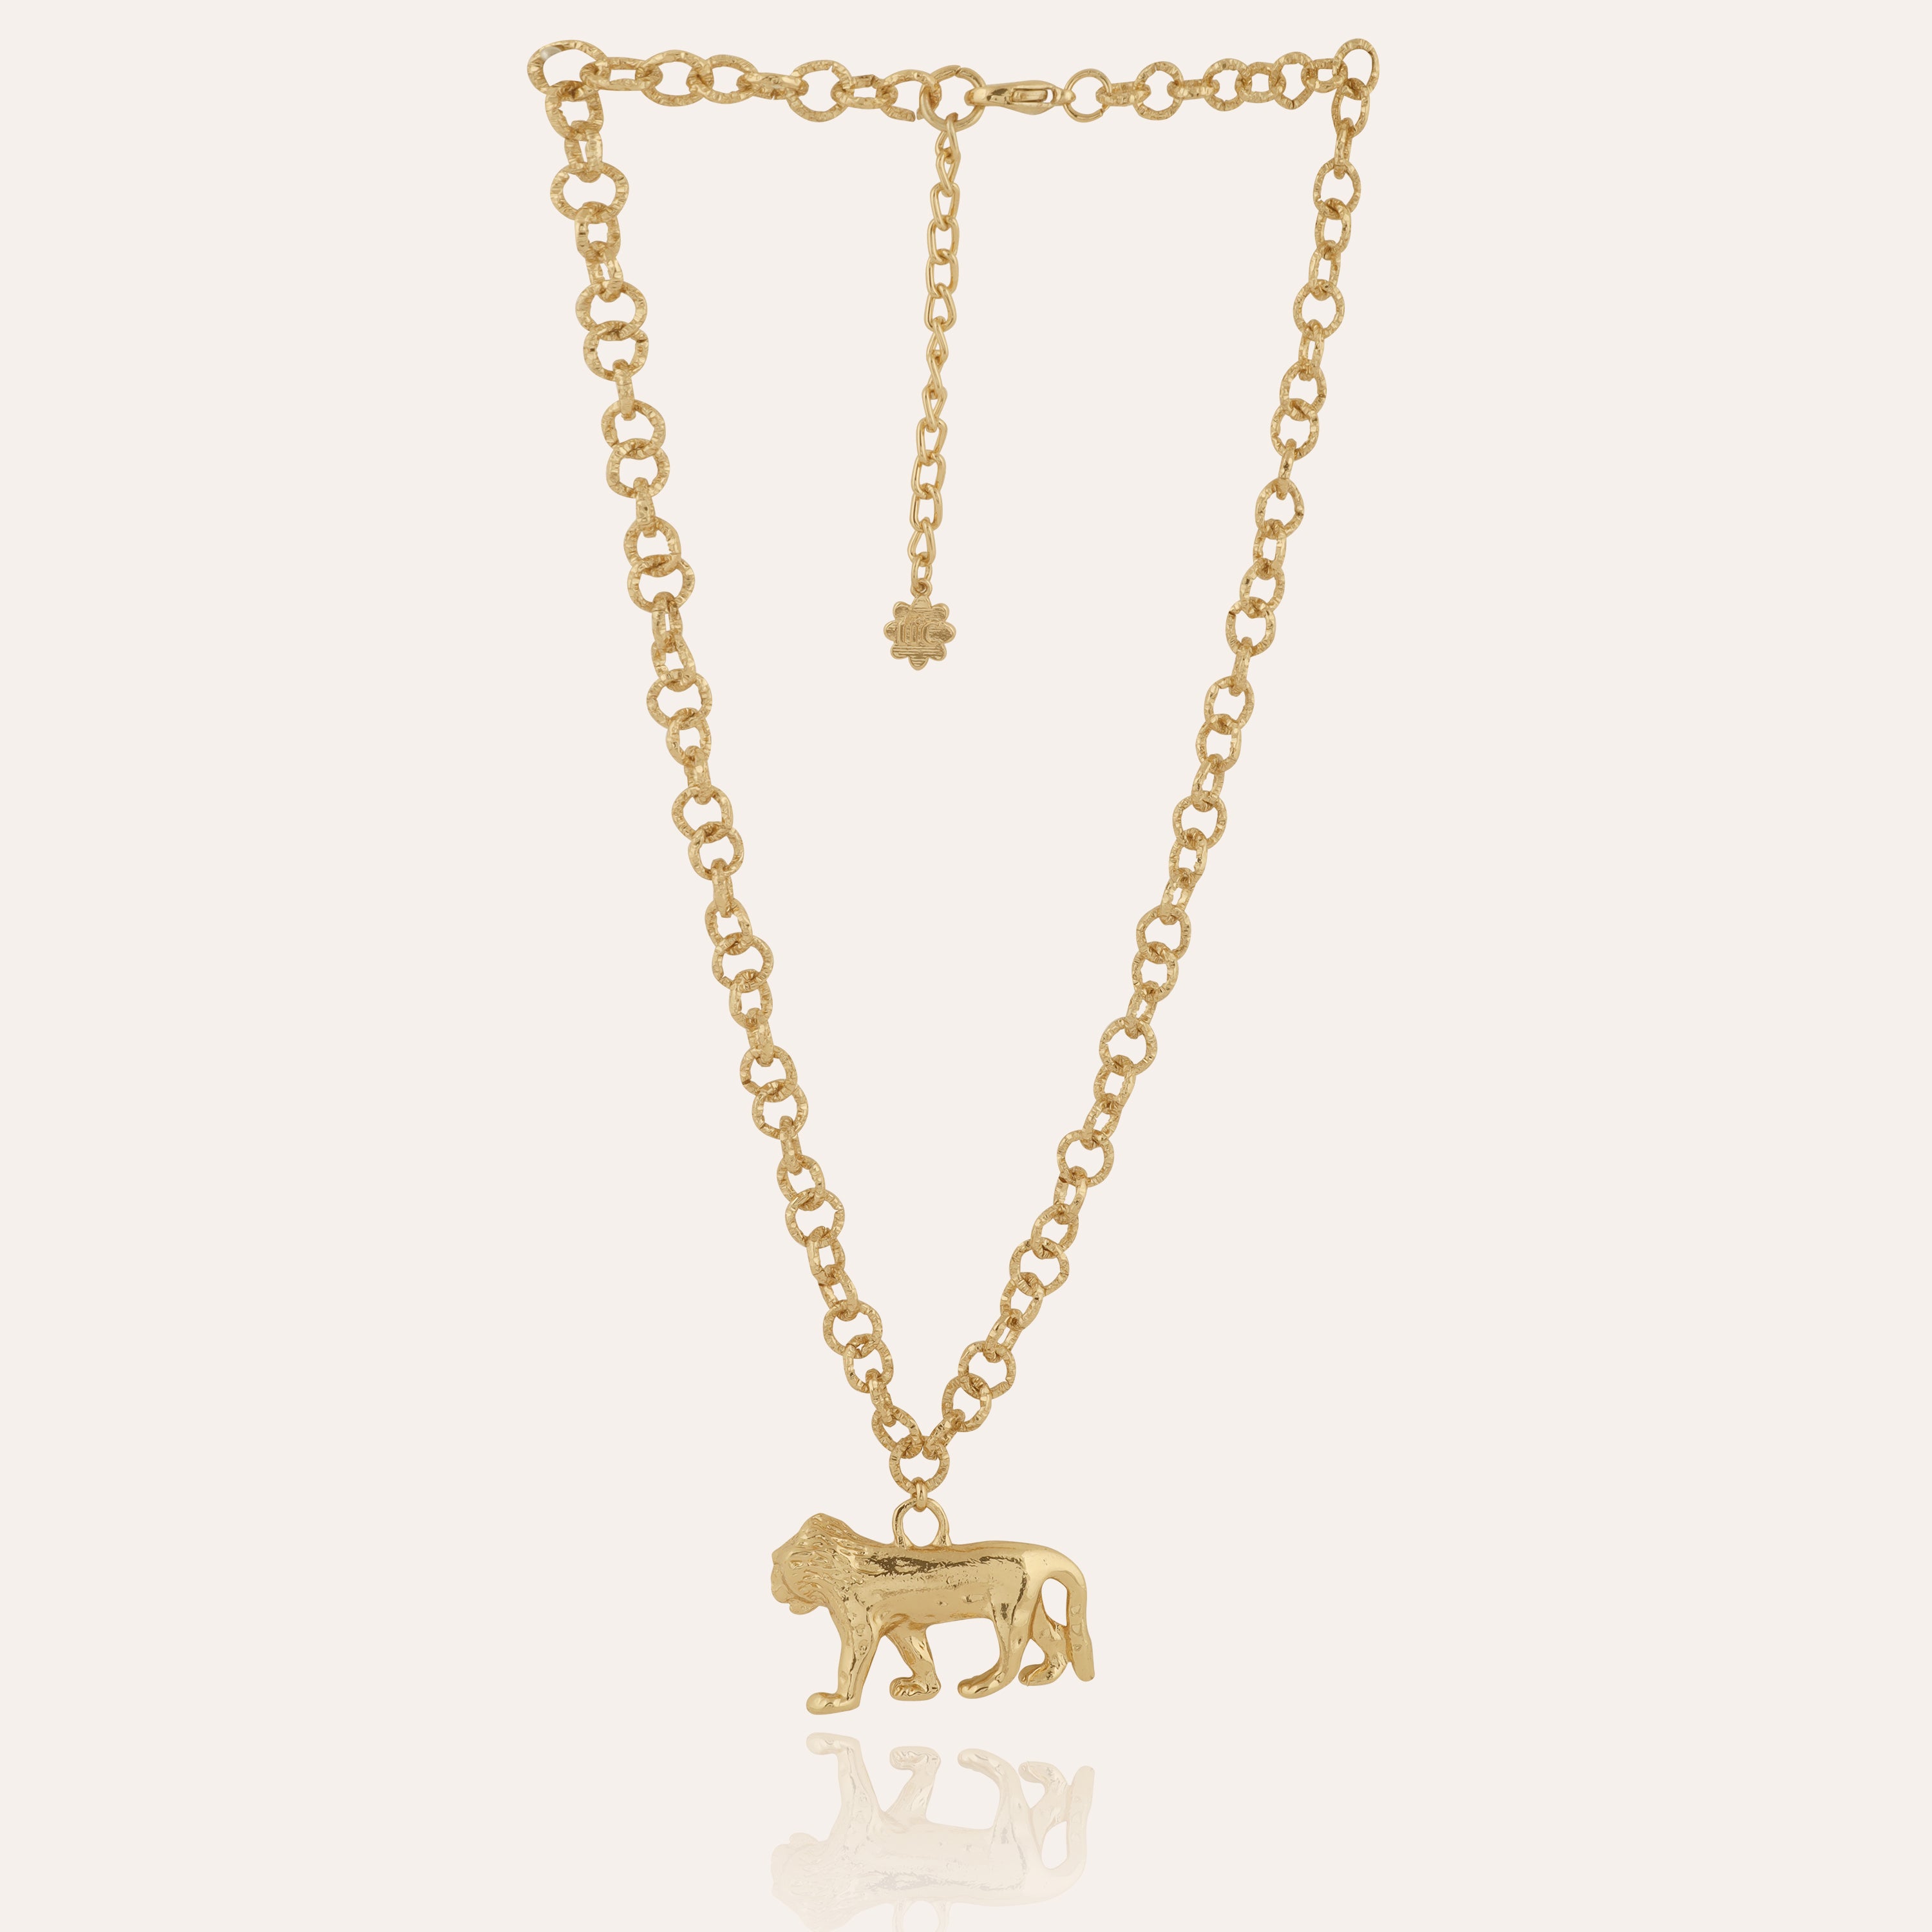 TFC Lion Statement Gold Plated Pendant Necklace-Enhance your elegance with our collection of gold-plated necklaces for women. Choose from stunning pendant necklaces, chic choker necklaces, and trendy layered necklaces. Our sleek and dainty designs are both affordable and anti-tarnish, ensuring lasting beauty. Enjoy the cheapest fashion jewellery, lightweight and stylish- only at The Fun Company